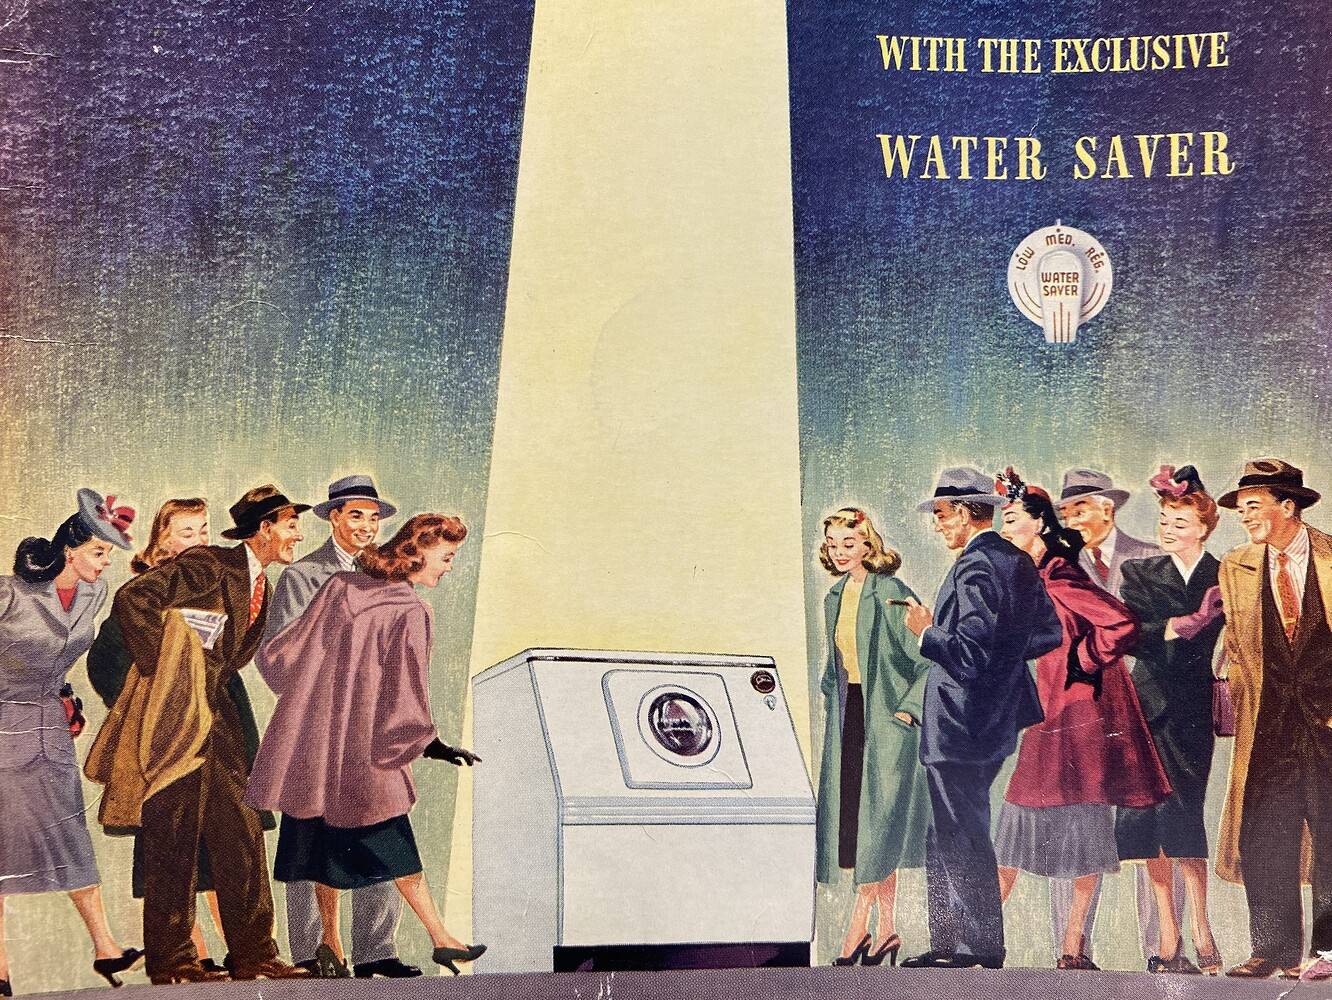 Close up of the cover of a Westinghouse Laundromat washing machine brochure. It features a laundry washing machine in the center with a spotlight shining on it while several Caucasian men and women  in suits and dresses marvel at it.